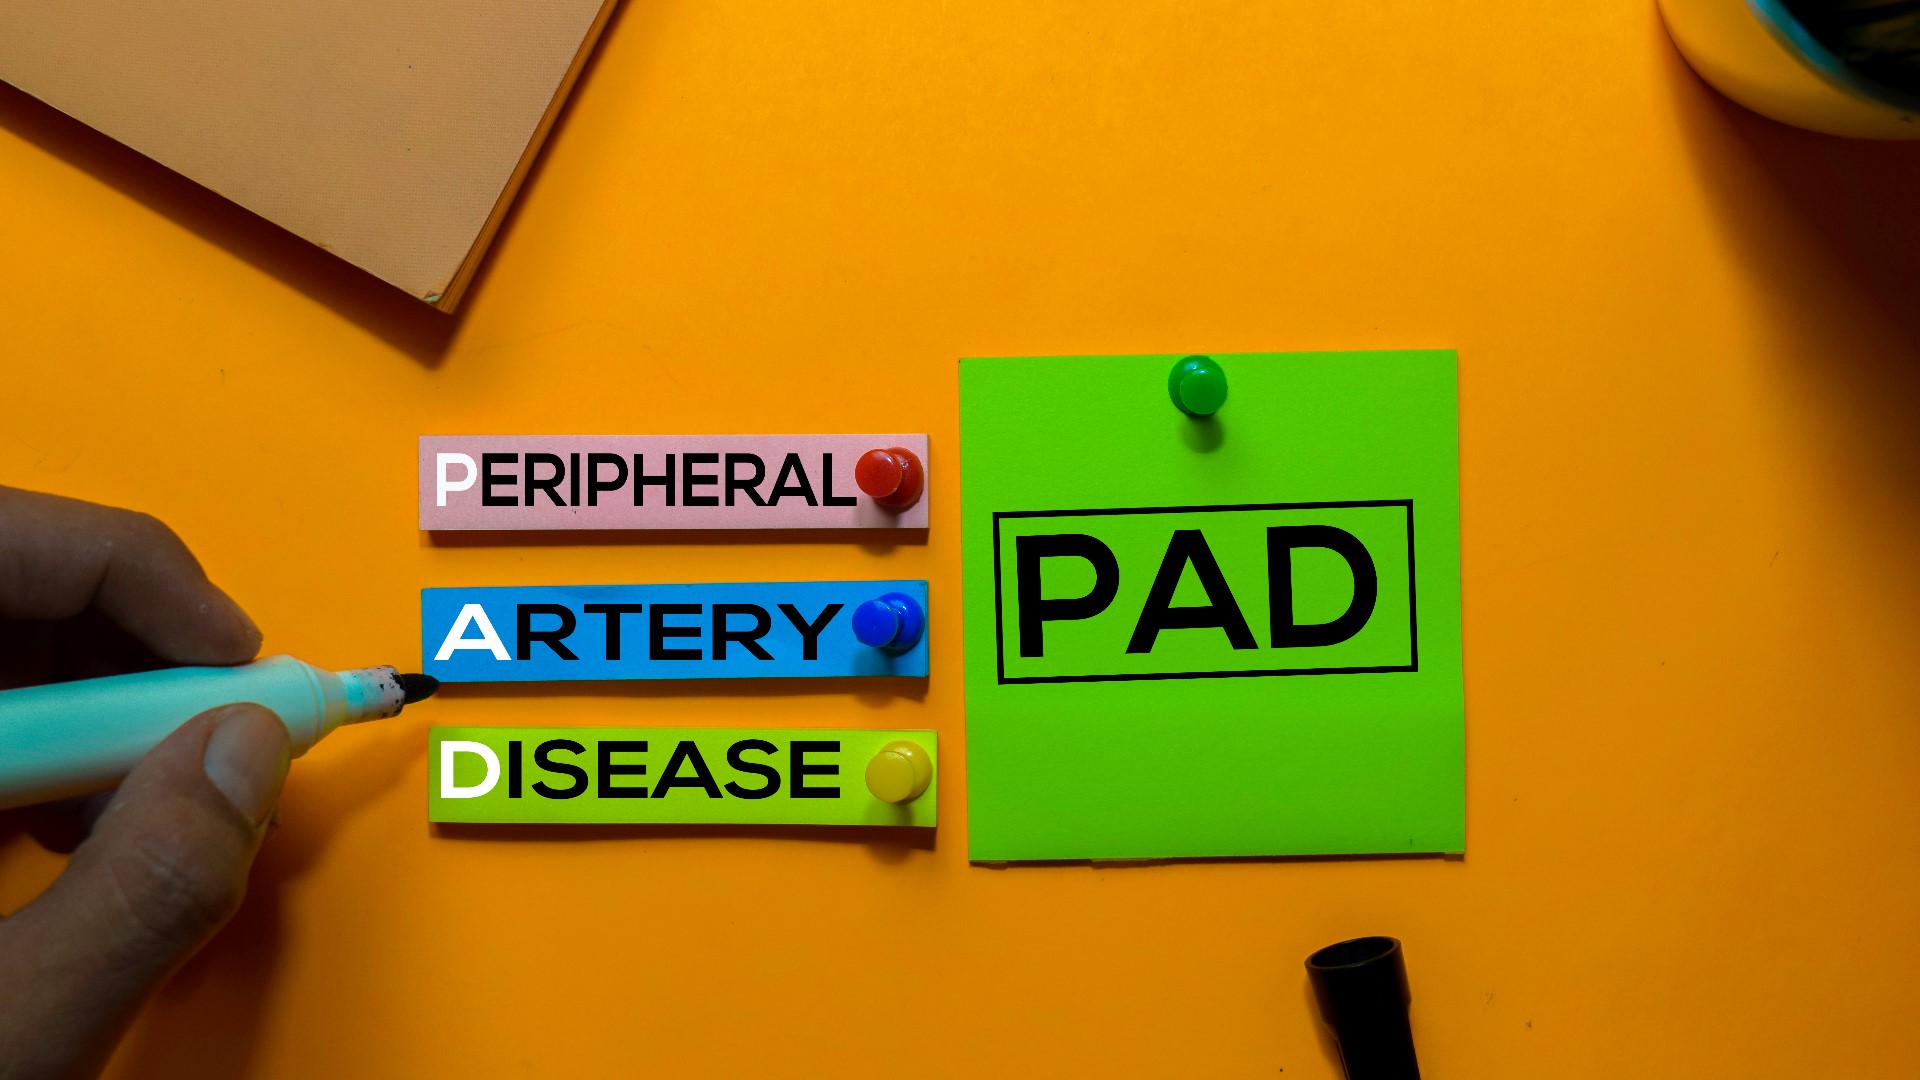 Chronic circulatory condition known as PAD affects nearly 20 million Americans.